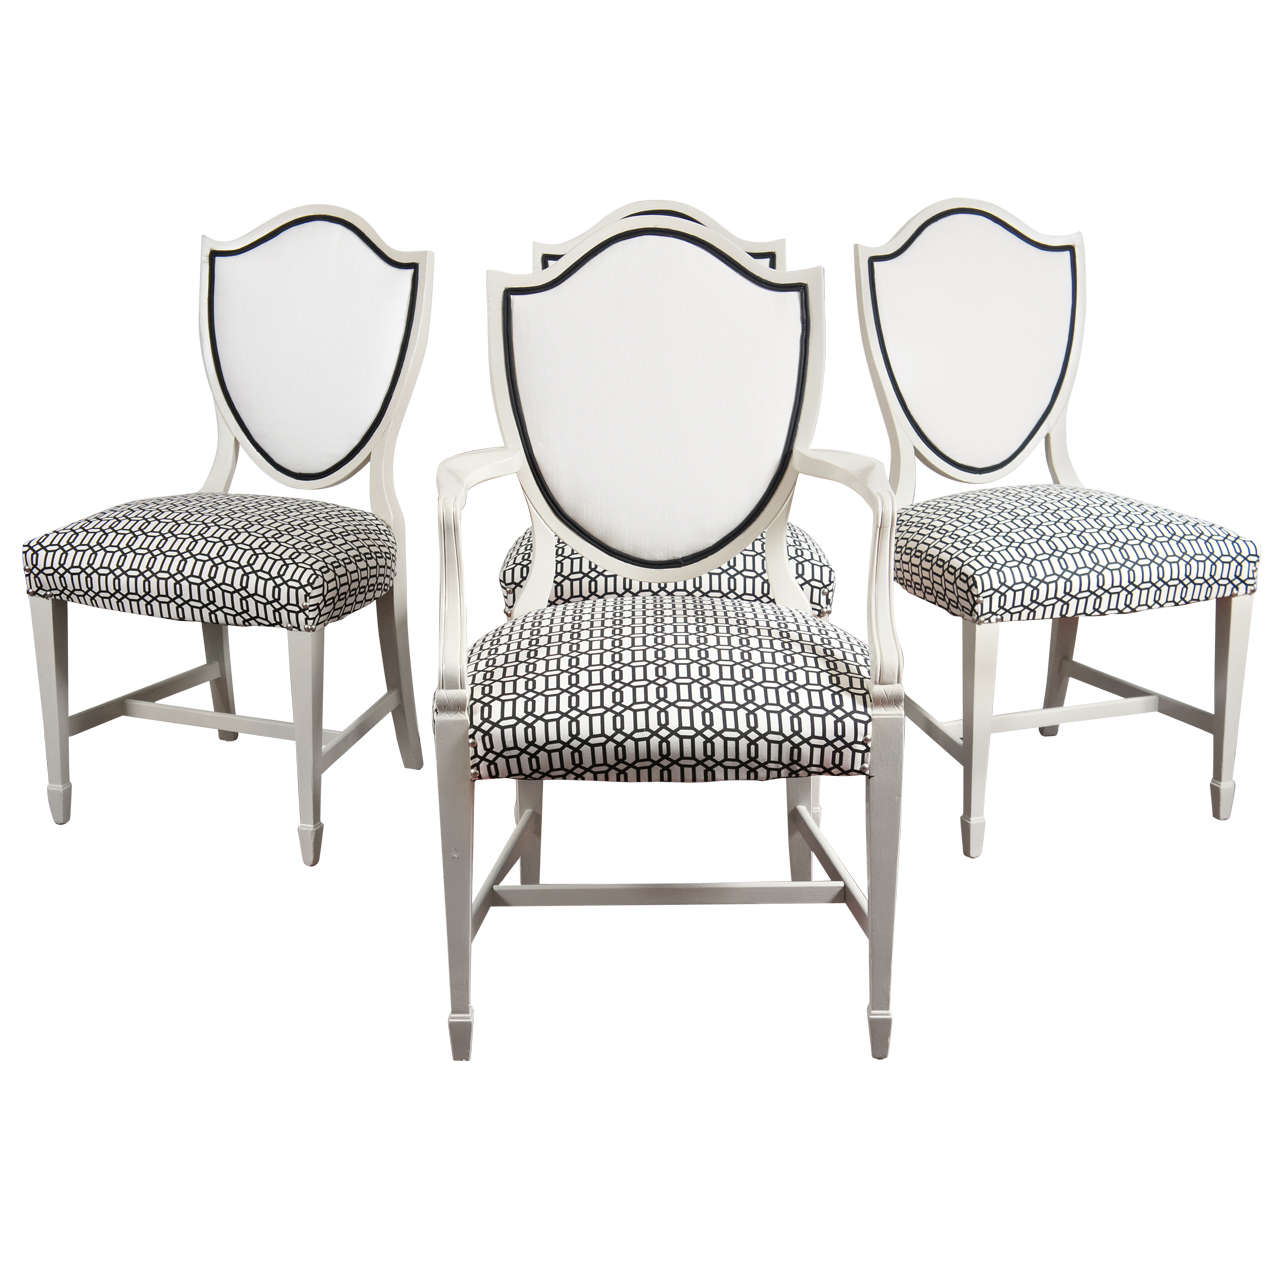 4 Adam Shield-Back Style Chairs